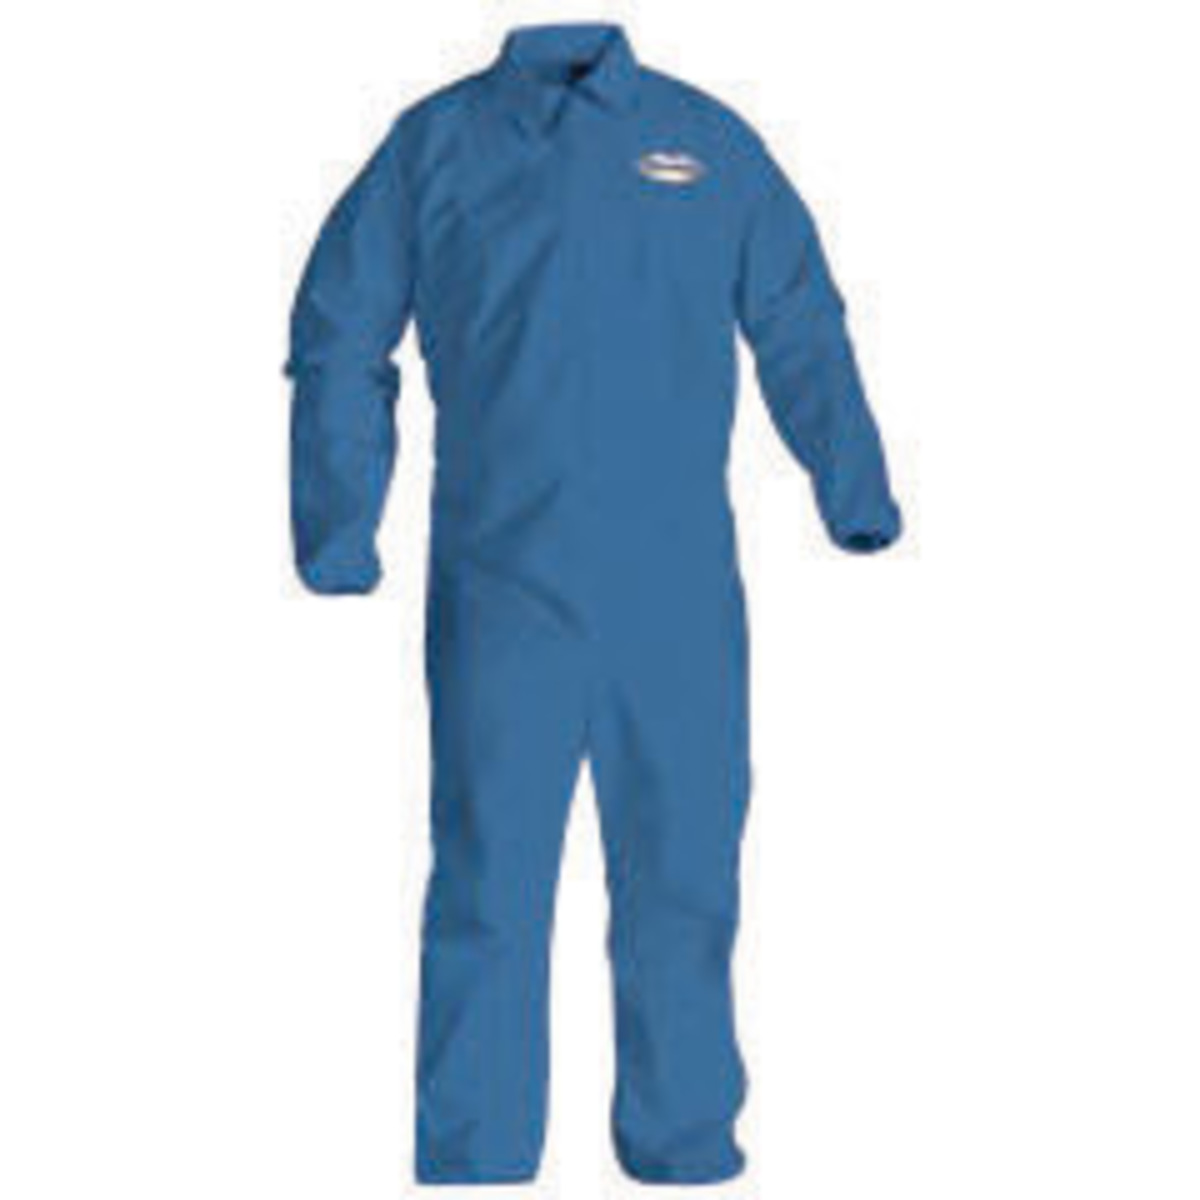 Kimberly-Clark Professional* X-Large Blue KleenGuard* A60 Film Laminate Coveralls With Storm Flap Over Front Zipper (Availabilit